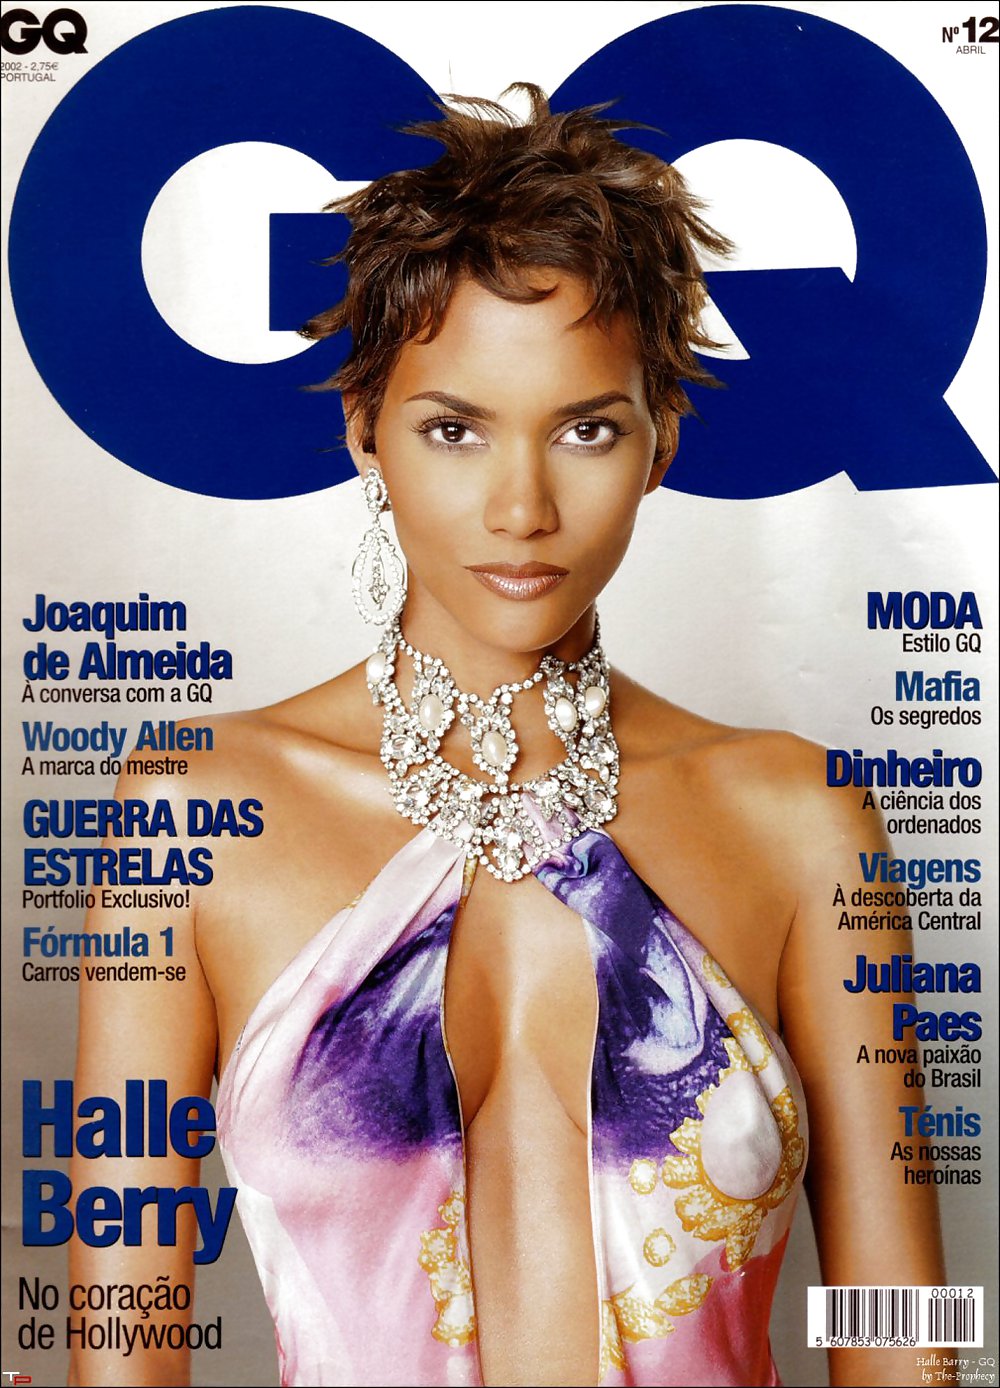 Halle berry ultimate glamour,cleavage,caps
 #8353432